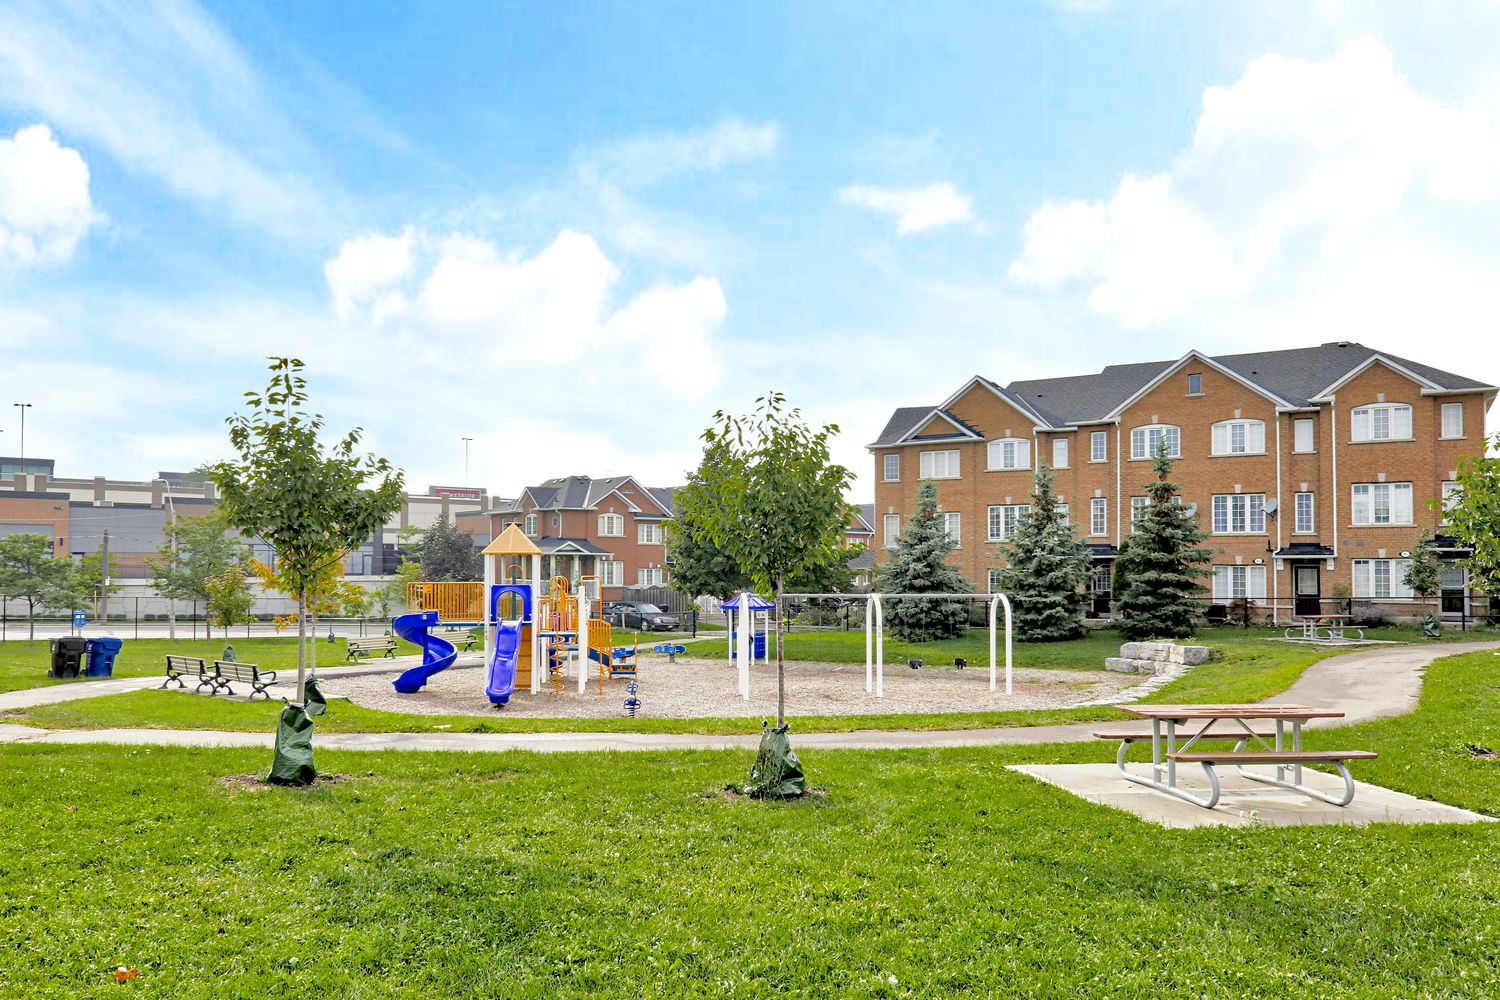 7-21 Weston Road. Townhomes of St. Clair II is located in  West End, Toronto - image #4 of 4